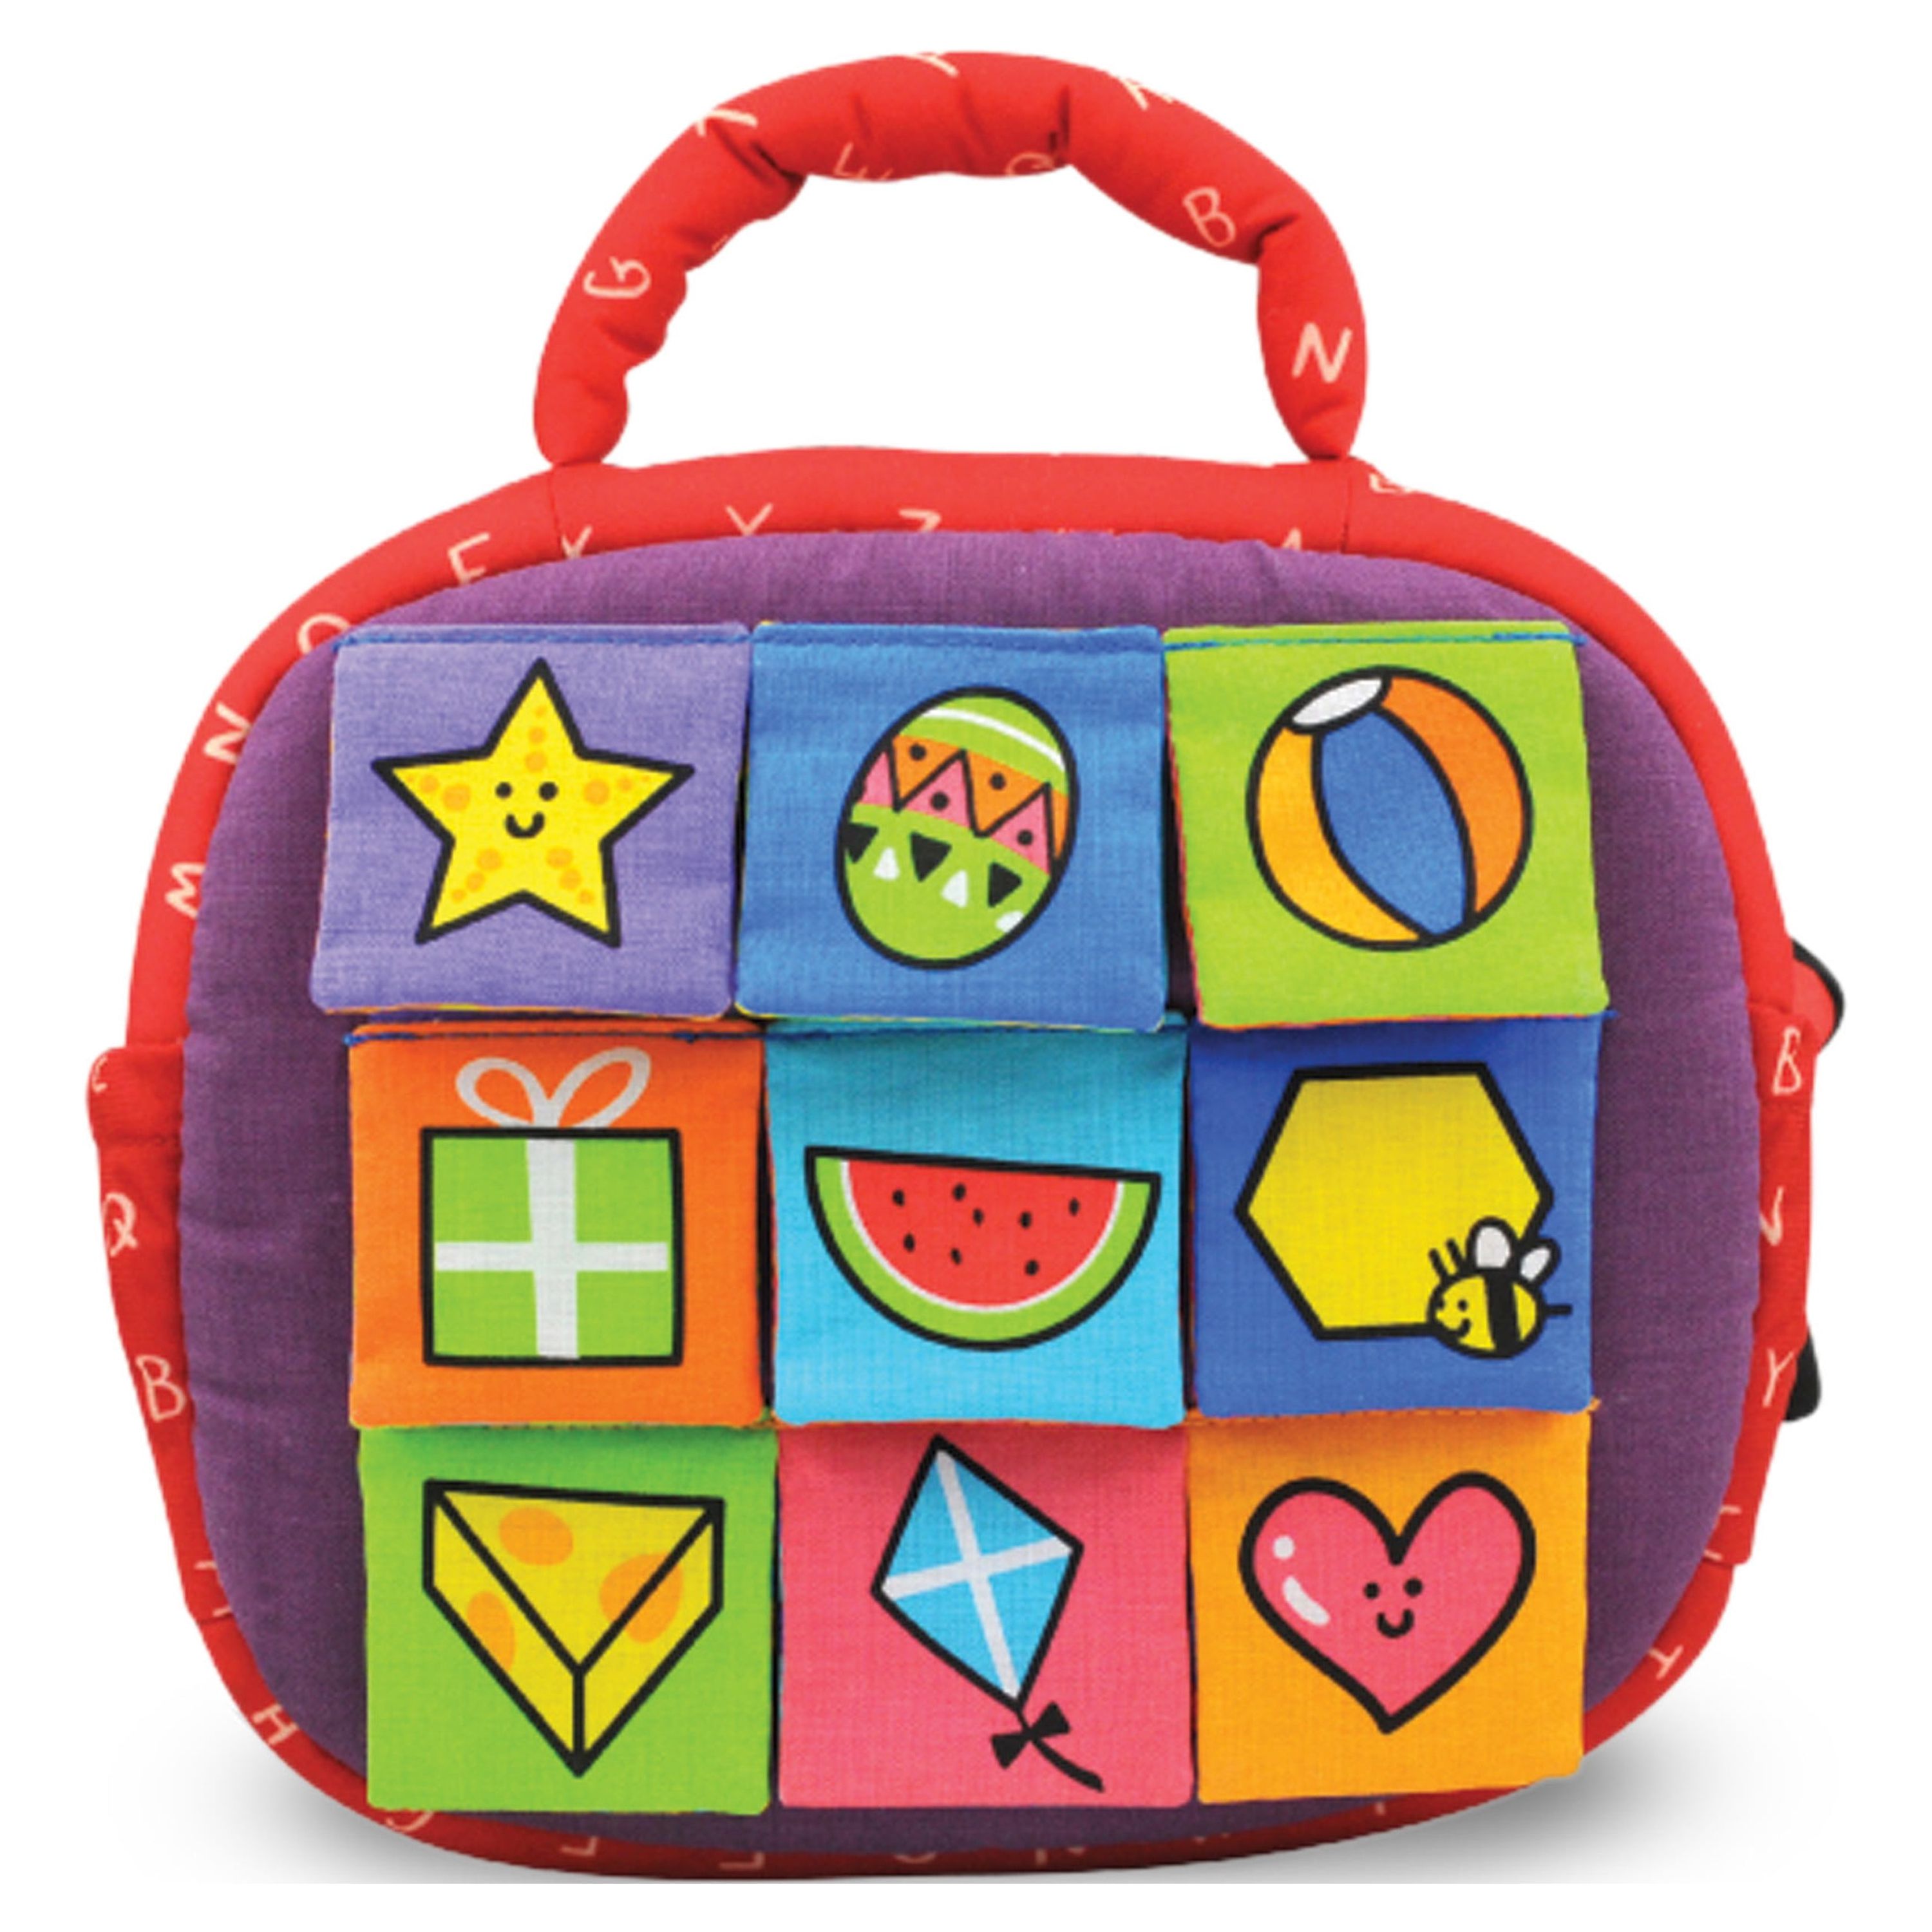 Melissa & Doug K's Kids Take-Along Shape Sorter Baby Toy With 2-Sided Activity Bag and 9 Textured Shape Blocks - image 5 of 11